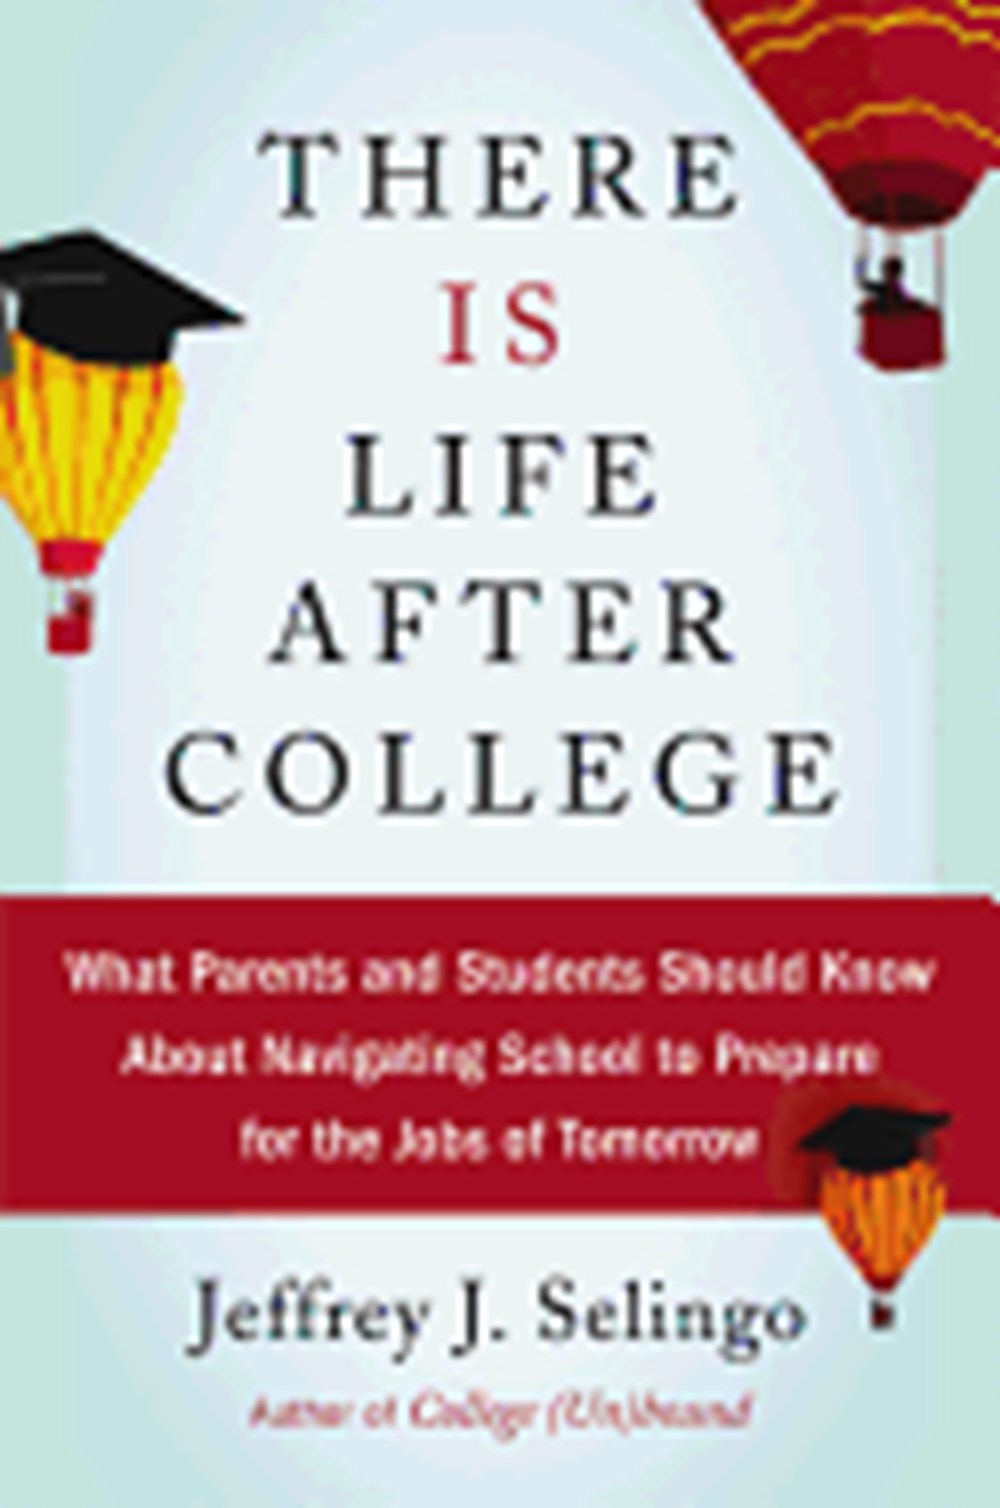 There Is Life After College: What Parents and Students Should Know about Navigating School to Prepar